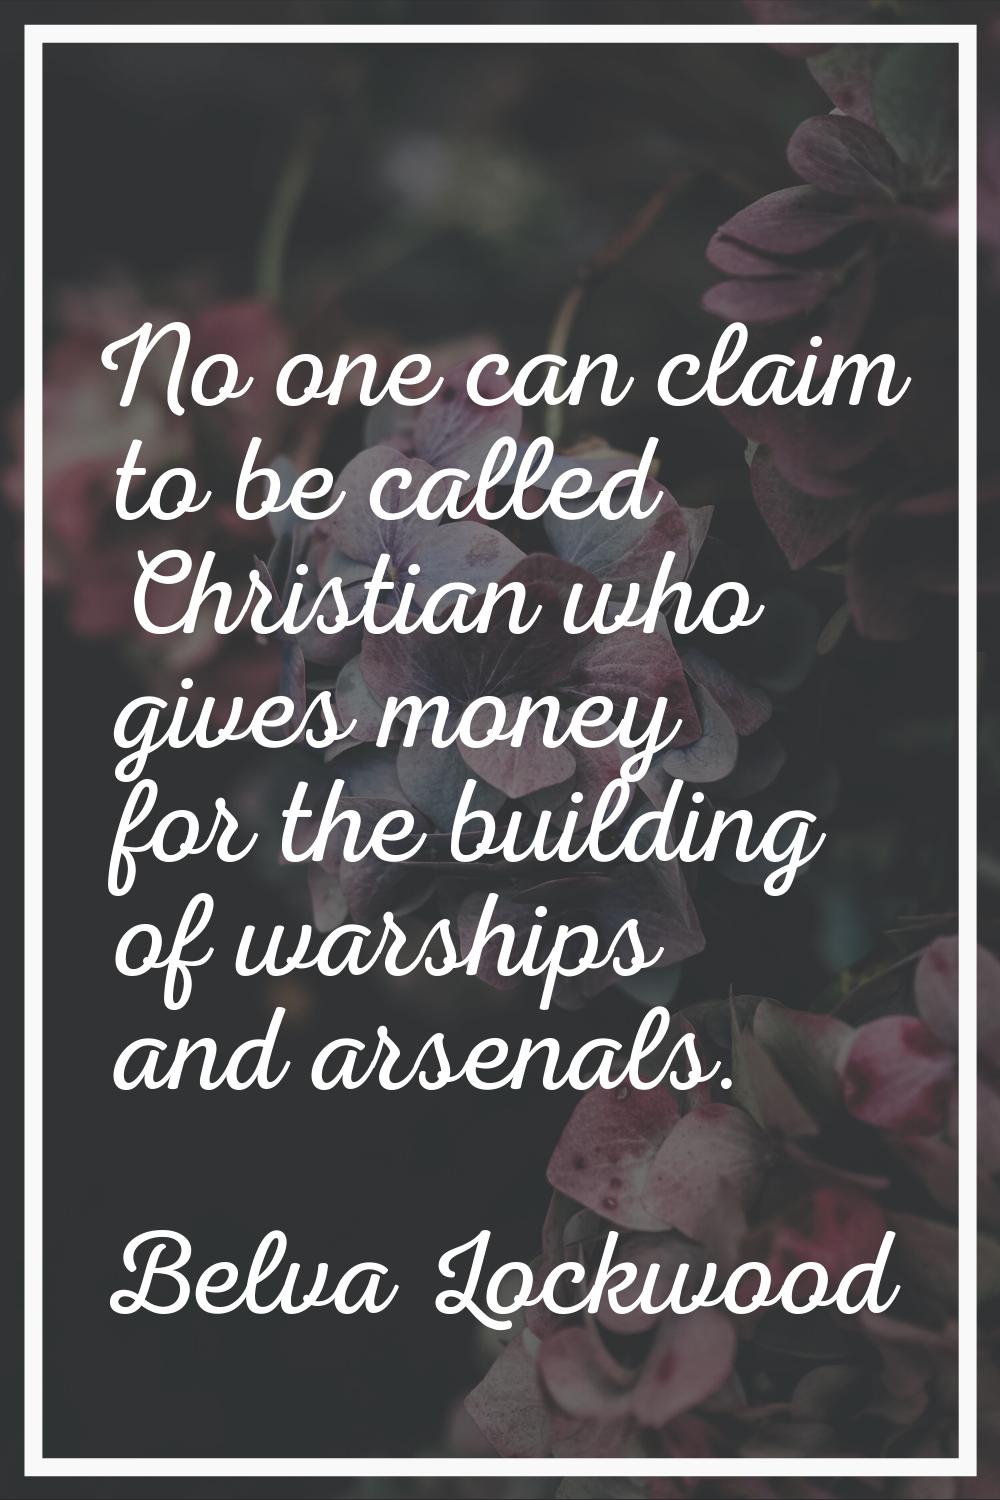 No one can claim to be called Christian who gives money for the building of warships and arsenals.